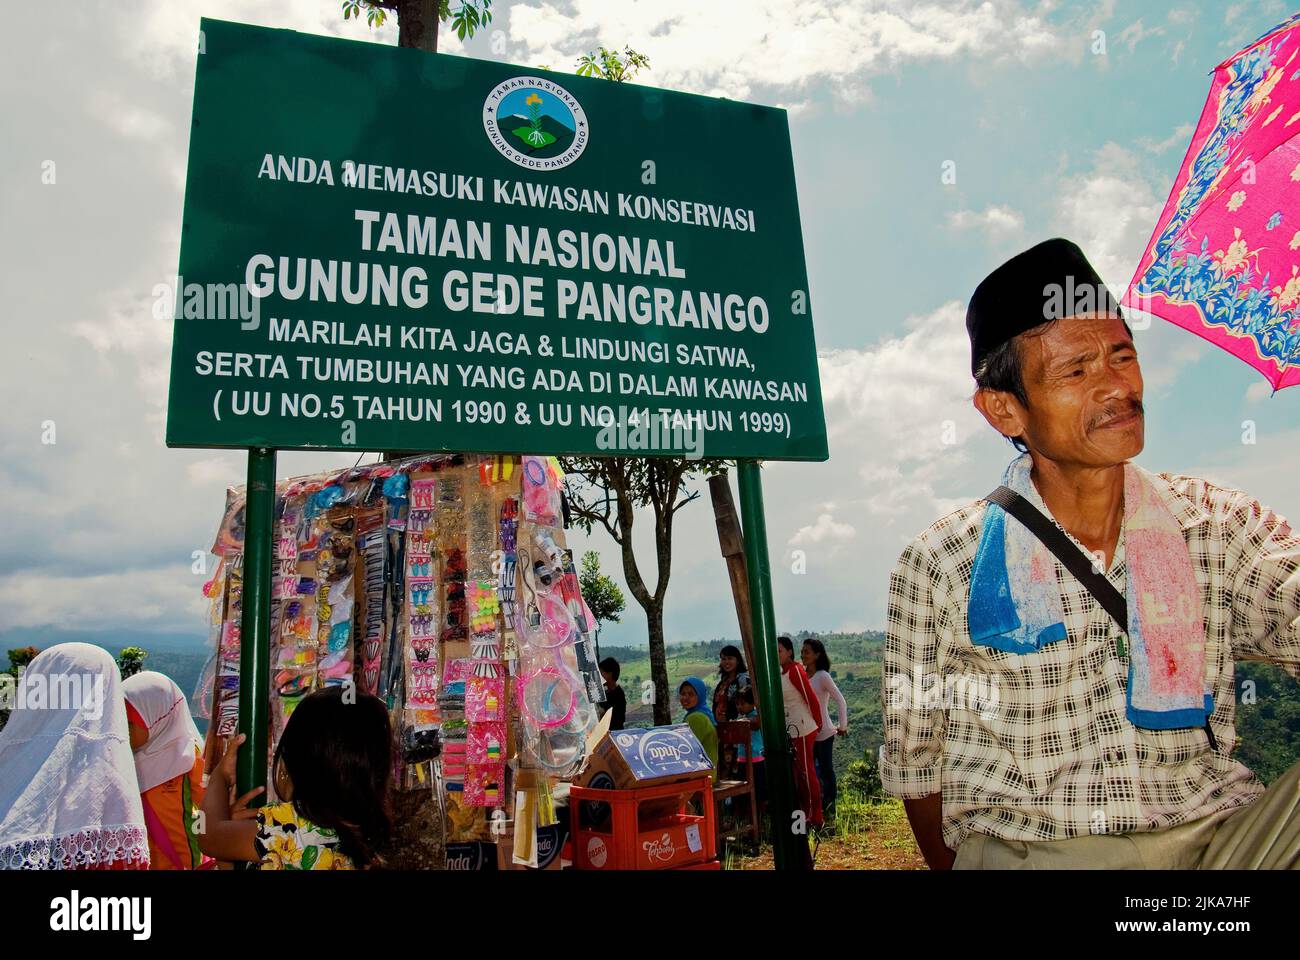 Villagers are photographed with the sign of Gede Pangrango National Park in Nagrak, a farming village located on the border of Gede Pangrango National Park in Cibadak, Sukabumi, West Java, Indonesia. Stock Photo